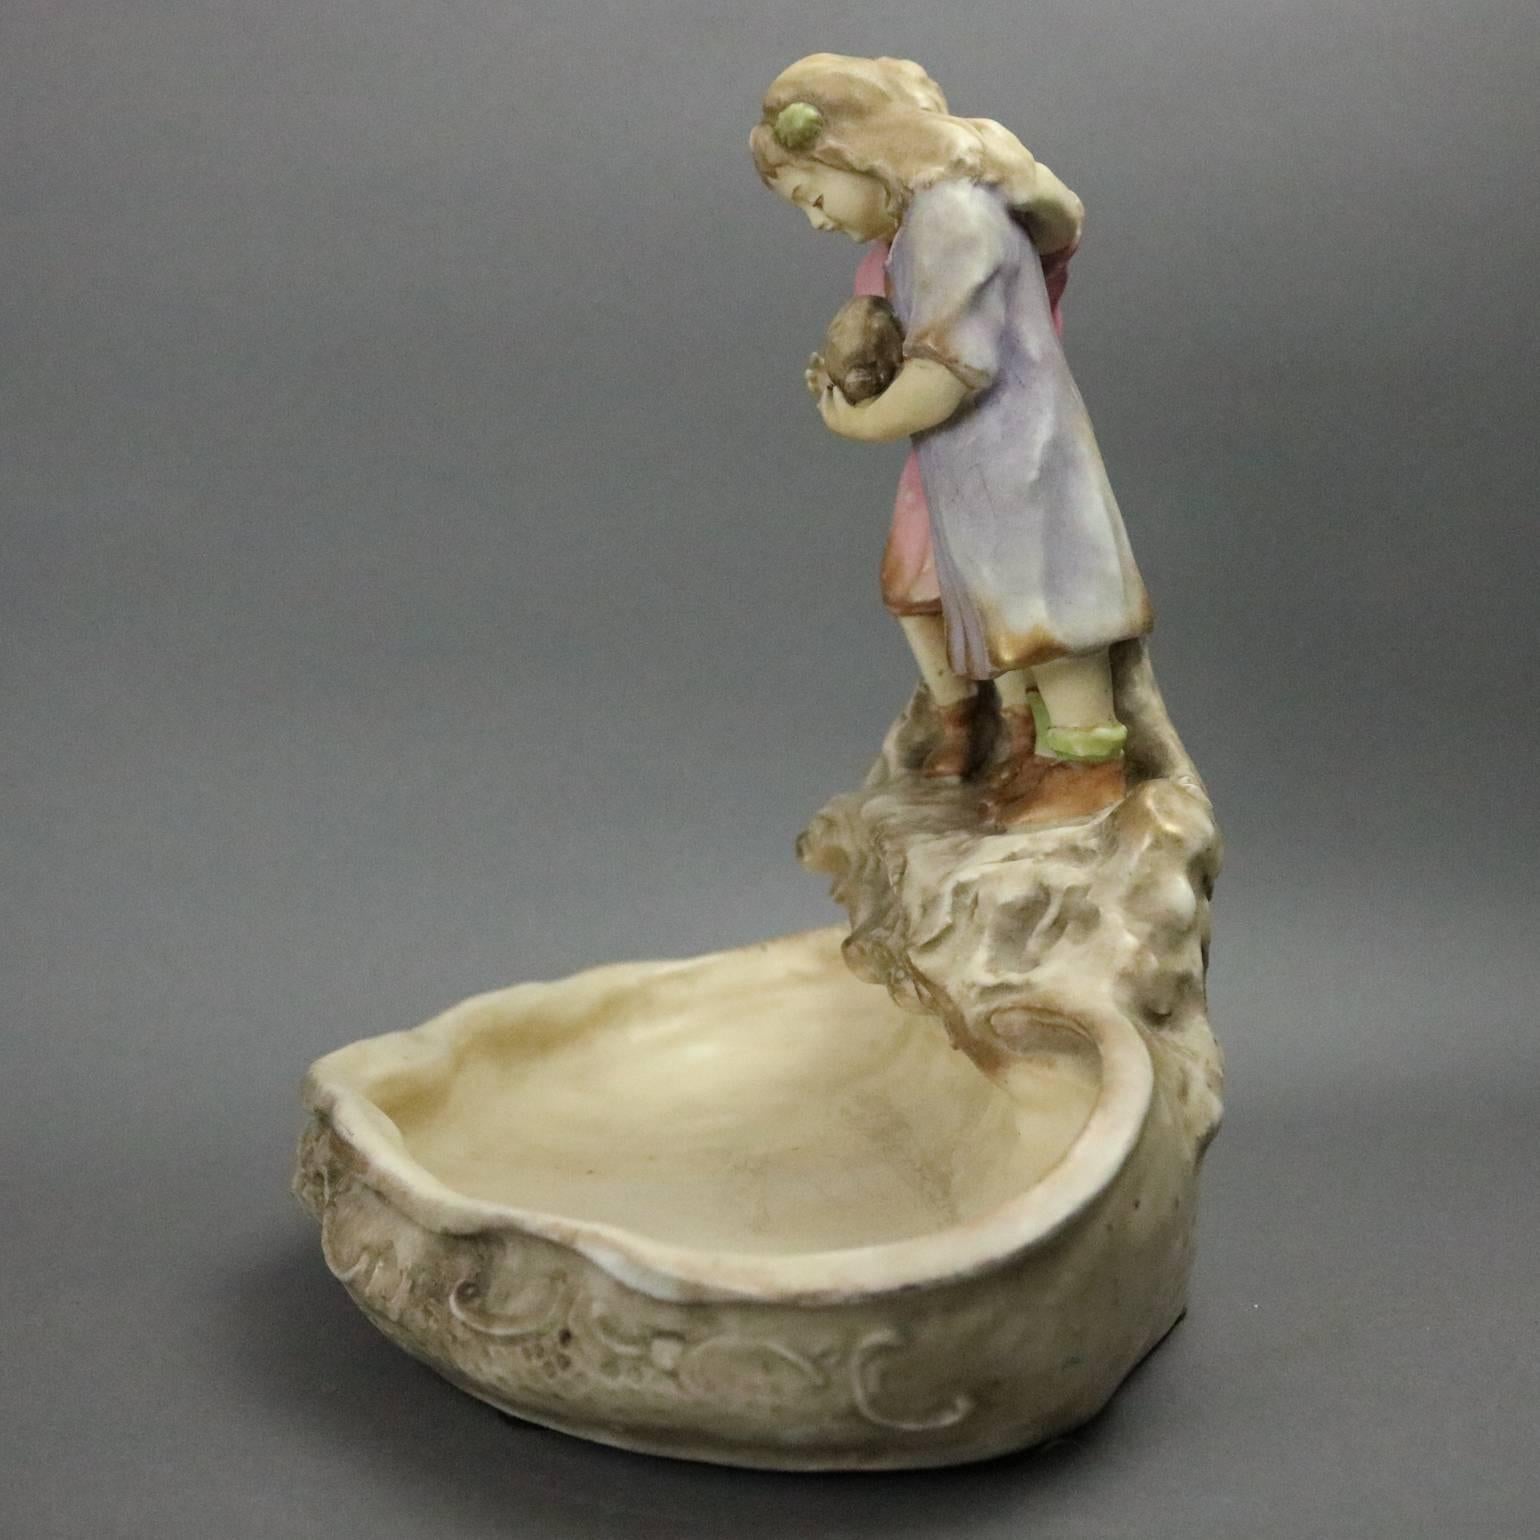 Antique Austrian figural Amphora Teplitz art pottery compote with children with their rabbit on the shore, maker's mark stamped on base, circa 1900

Measures: 10.5" H x 11.5" W x 7" D.